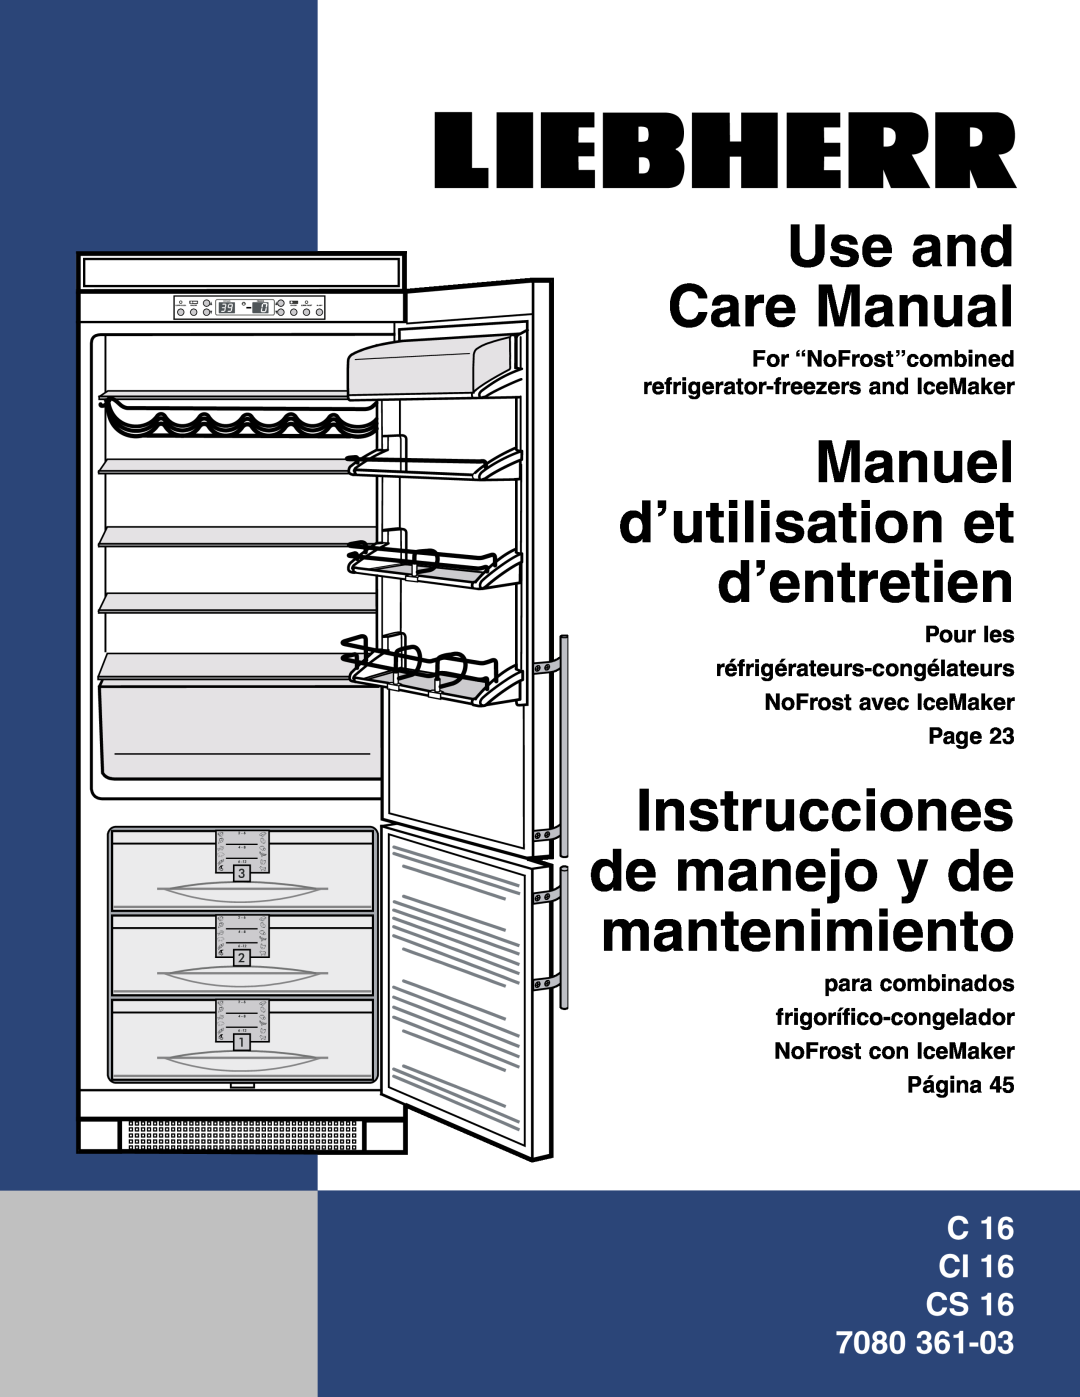 Liebherr CS 16 manuel dutilisation For “NoFrost”combined refrigerator-freezers and IceMaker, Use and Care Manual 